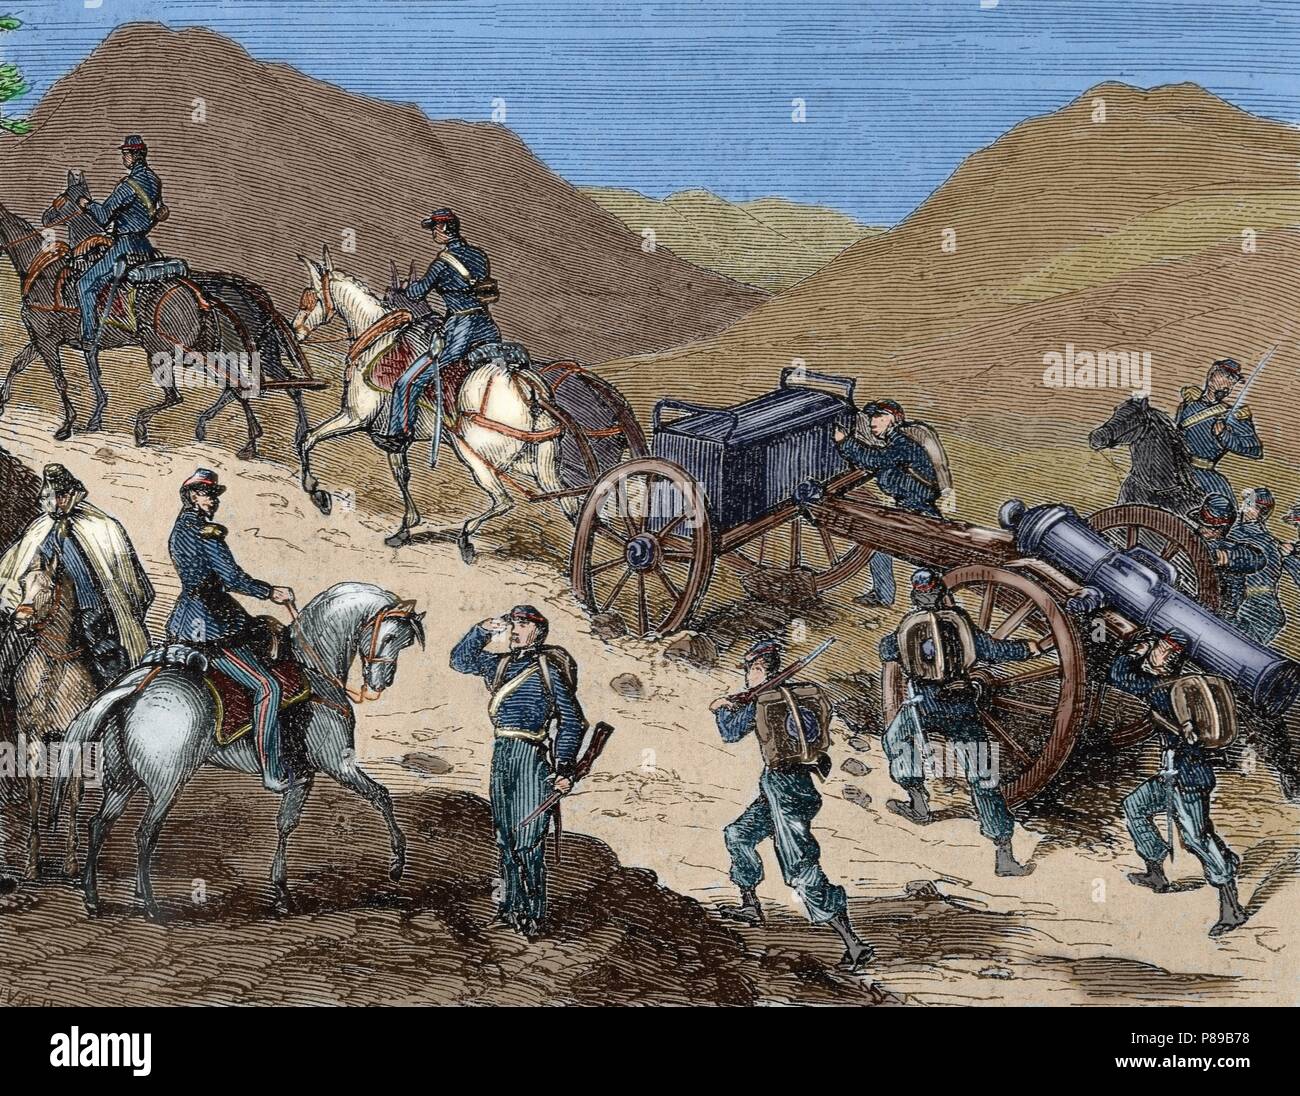 Italian unification (1859-1924). The Second Italian Independence War, 1859. Piedmont artillery take positions before Gaeta. 'L'Illustration', 1860. Engraving. Colored. Stock Photo